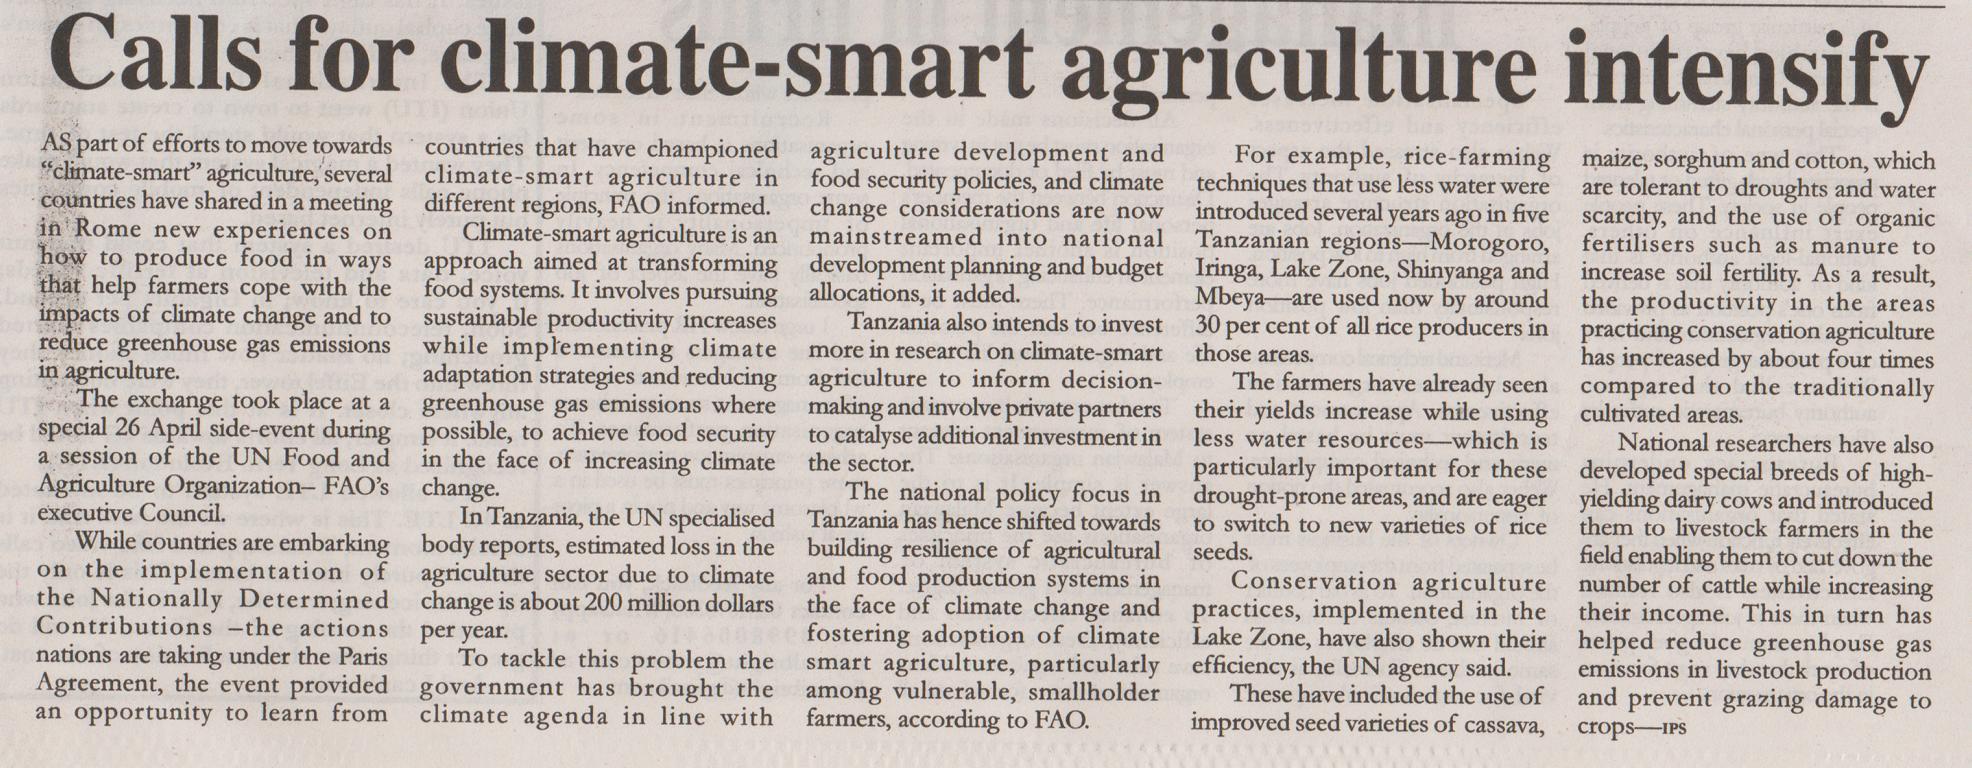 2017-05-03_Wed_Calls for climate-smart agriculture intensify_The Daily Times.JPG